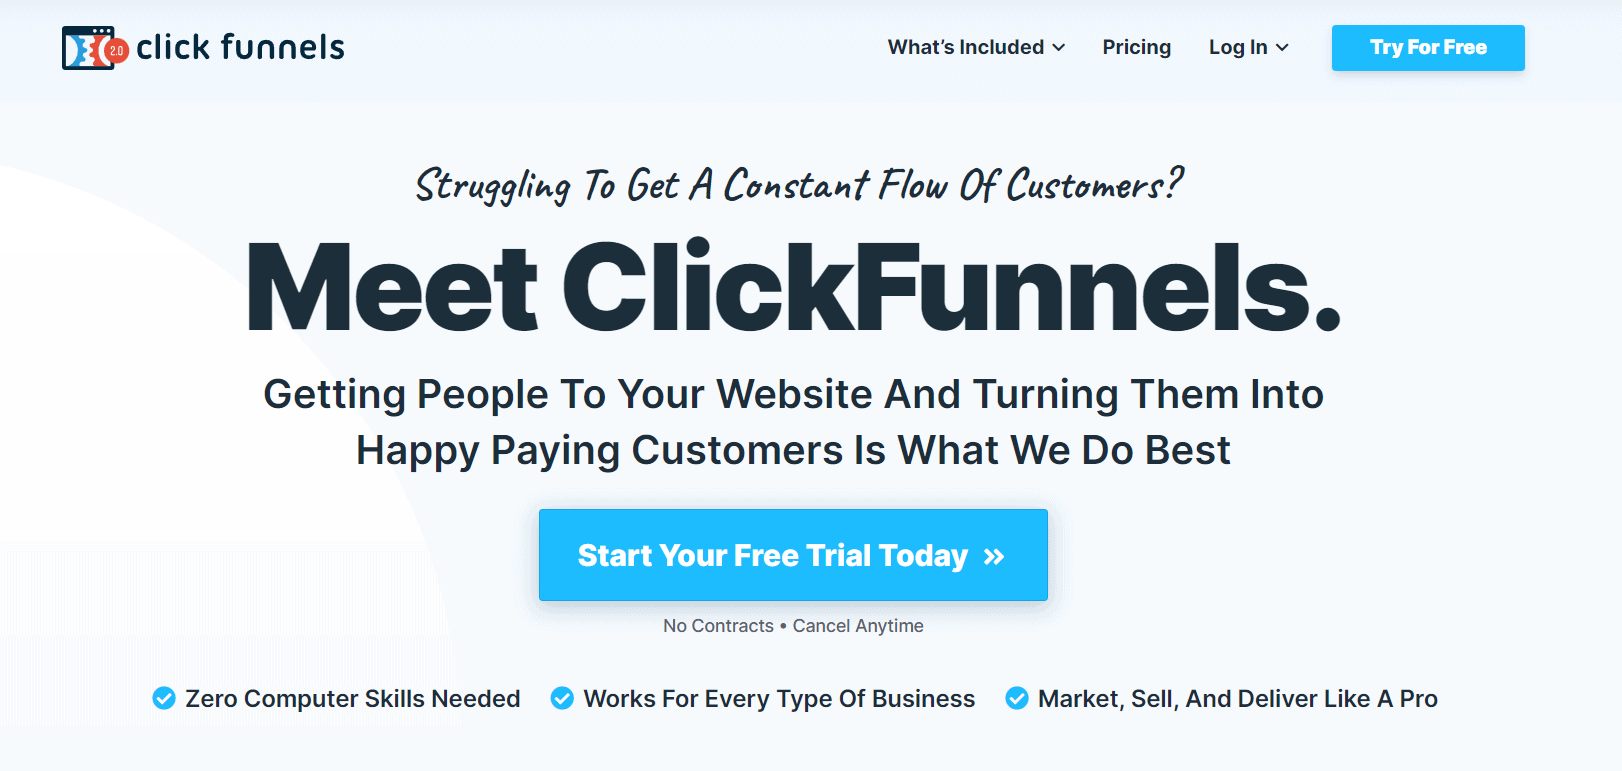 ClickFunnels Overview